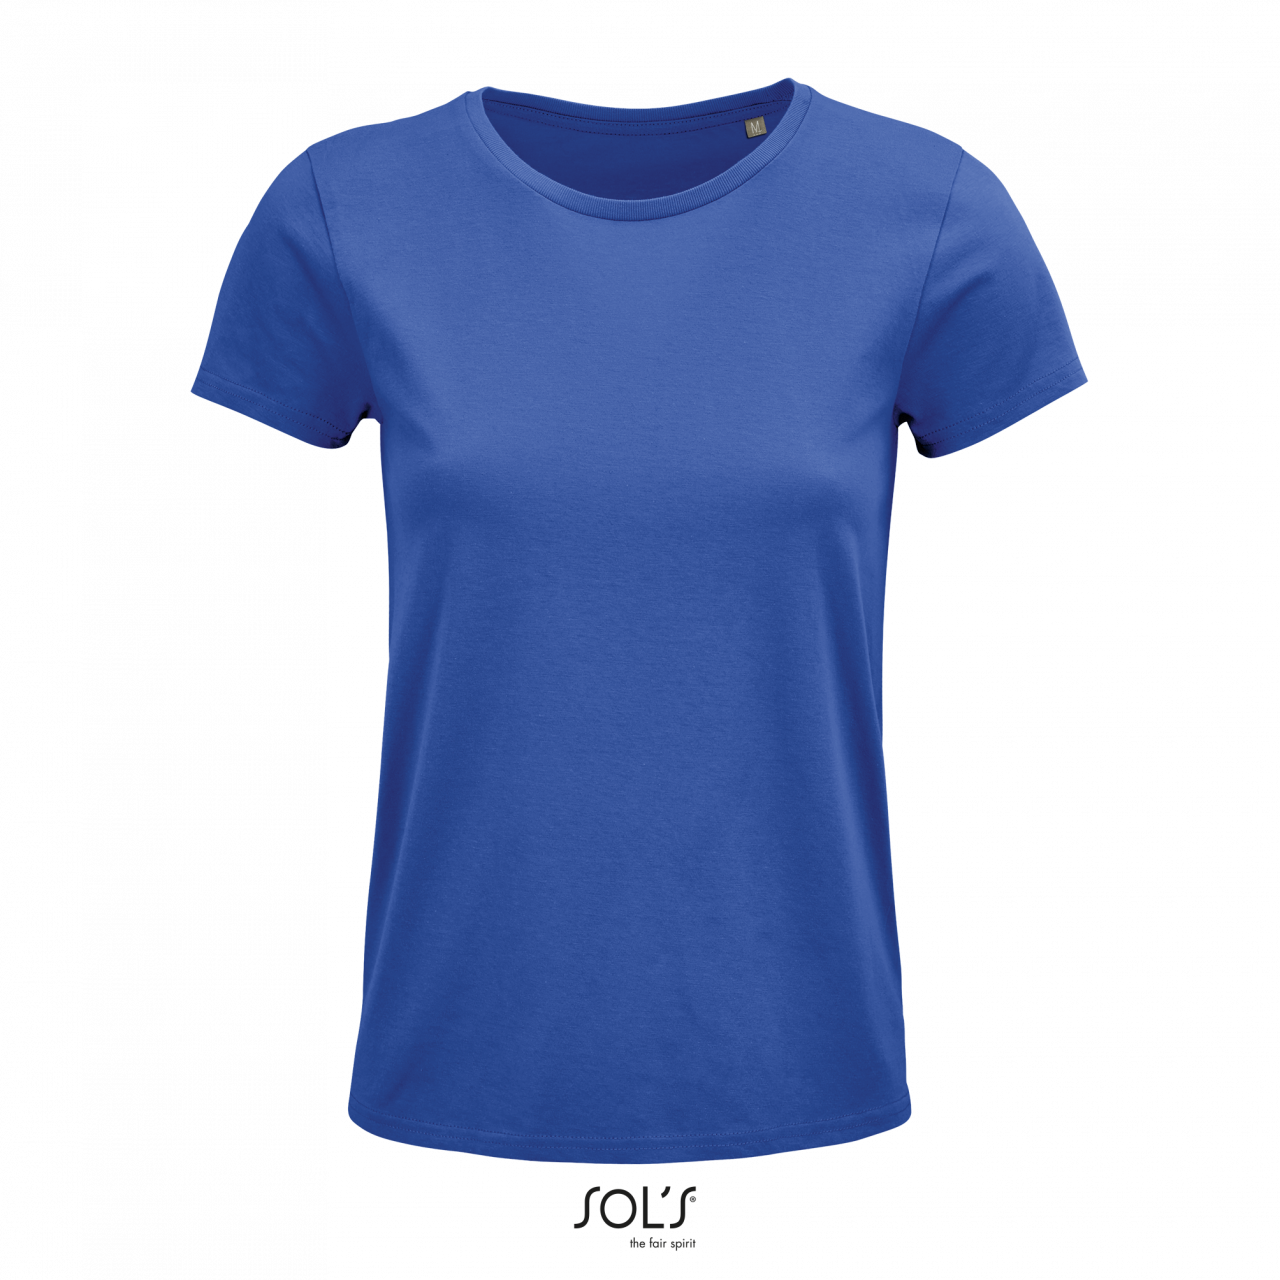 Sol's Crusader Women - Round-neck Fitted Jersey T-shirt - Sol's Crusader Women - Round-neck Fitted Jersey T-shirt - Royal